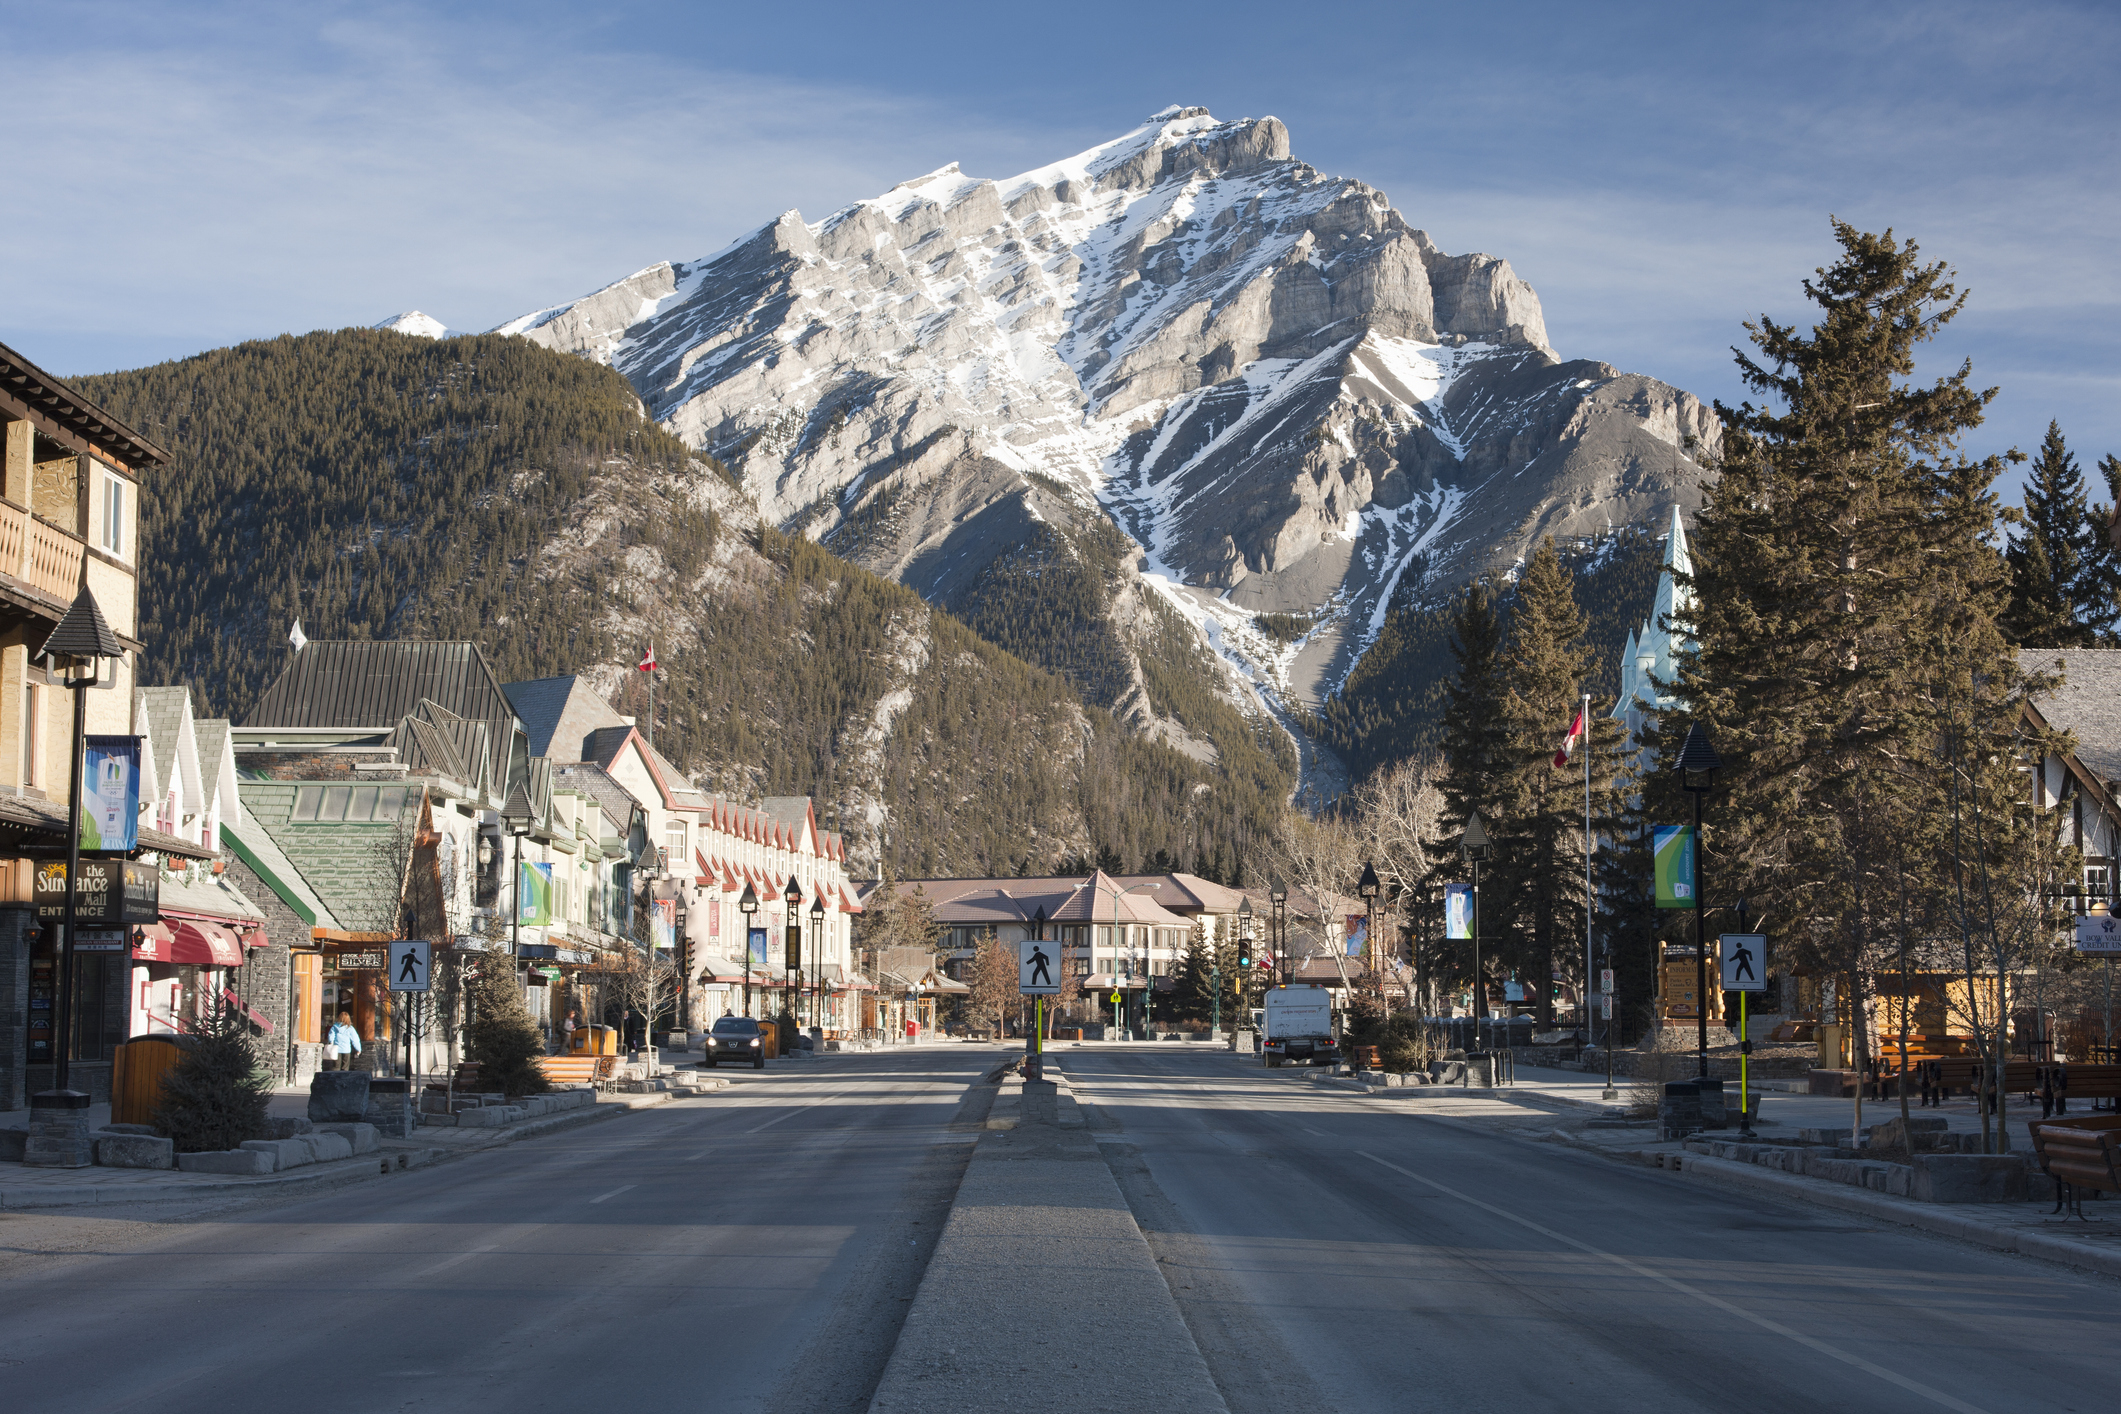 View of a quiet, empty main street in Banff, Canada, with shops on both sides and a snow-covered mountain in the background